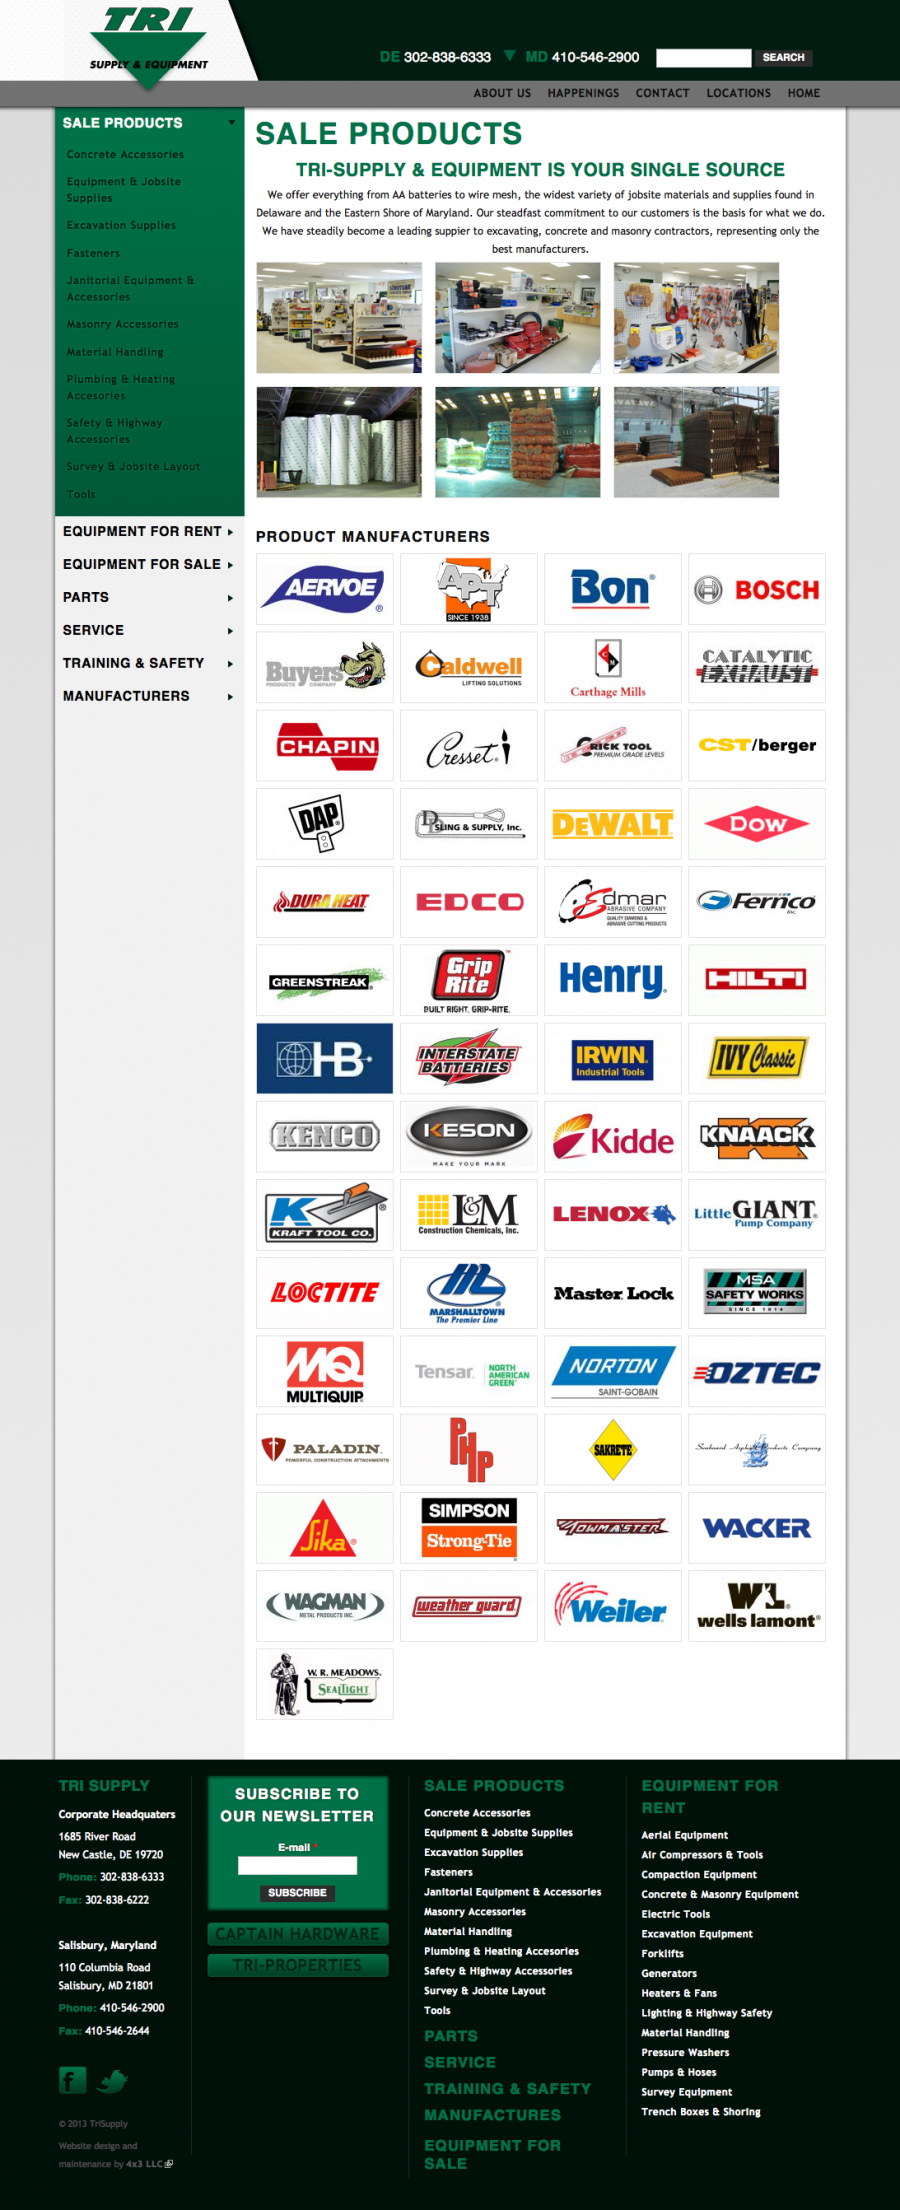 Tri Supply, Listing of Equipment and Manufacturers for Sale